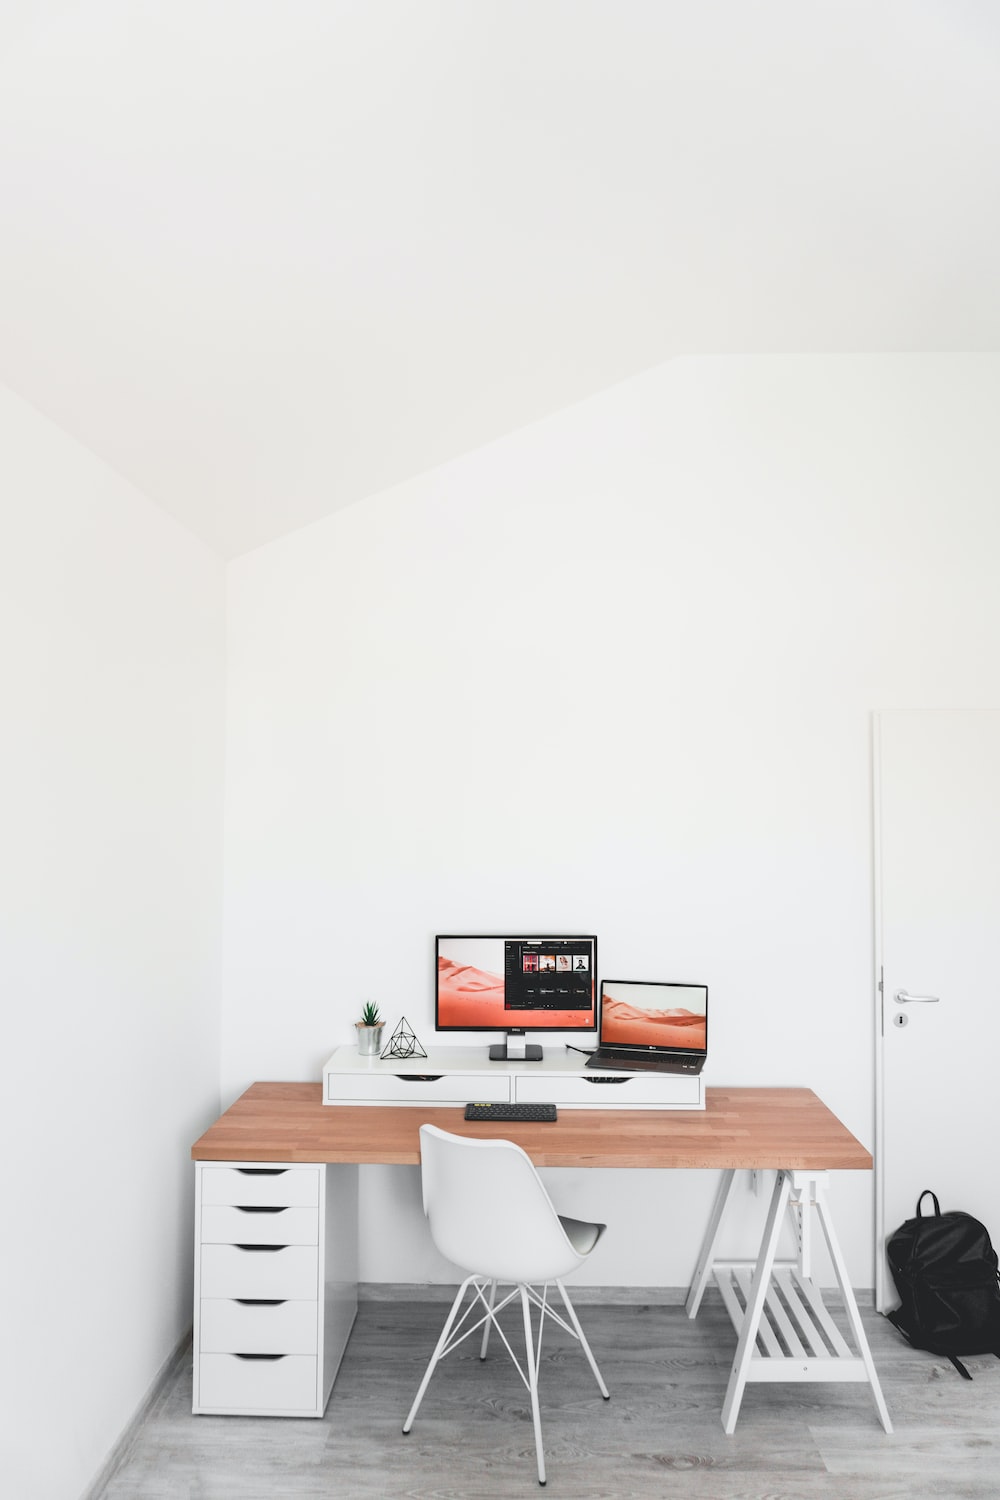 Should your desk face the wall or door?